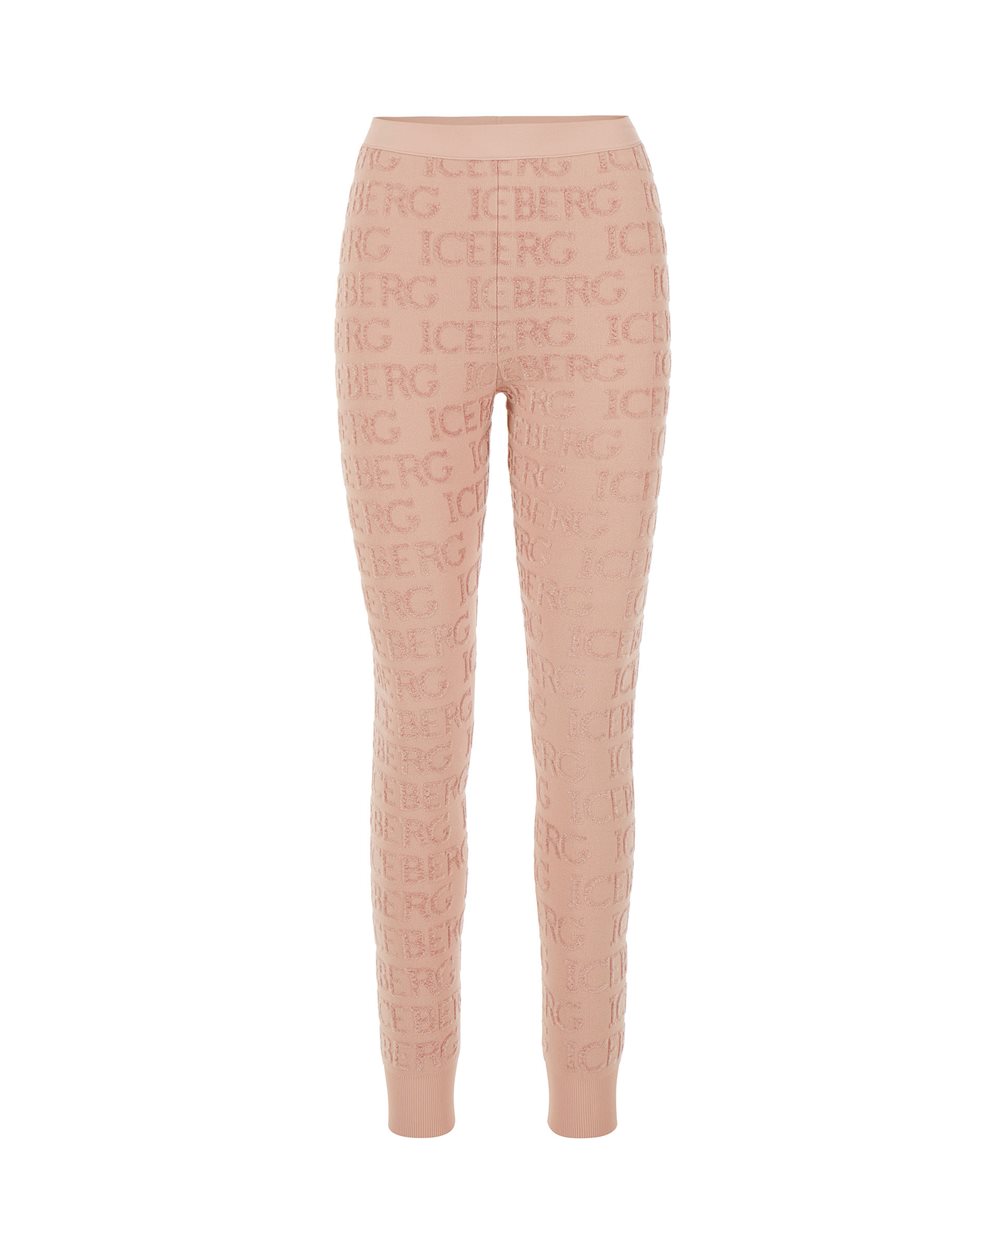 Gucci Embroidered Tights in Pink